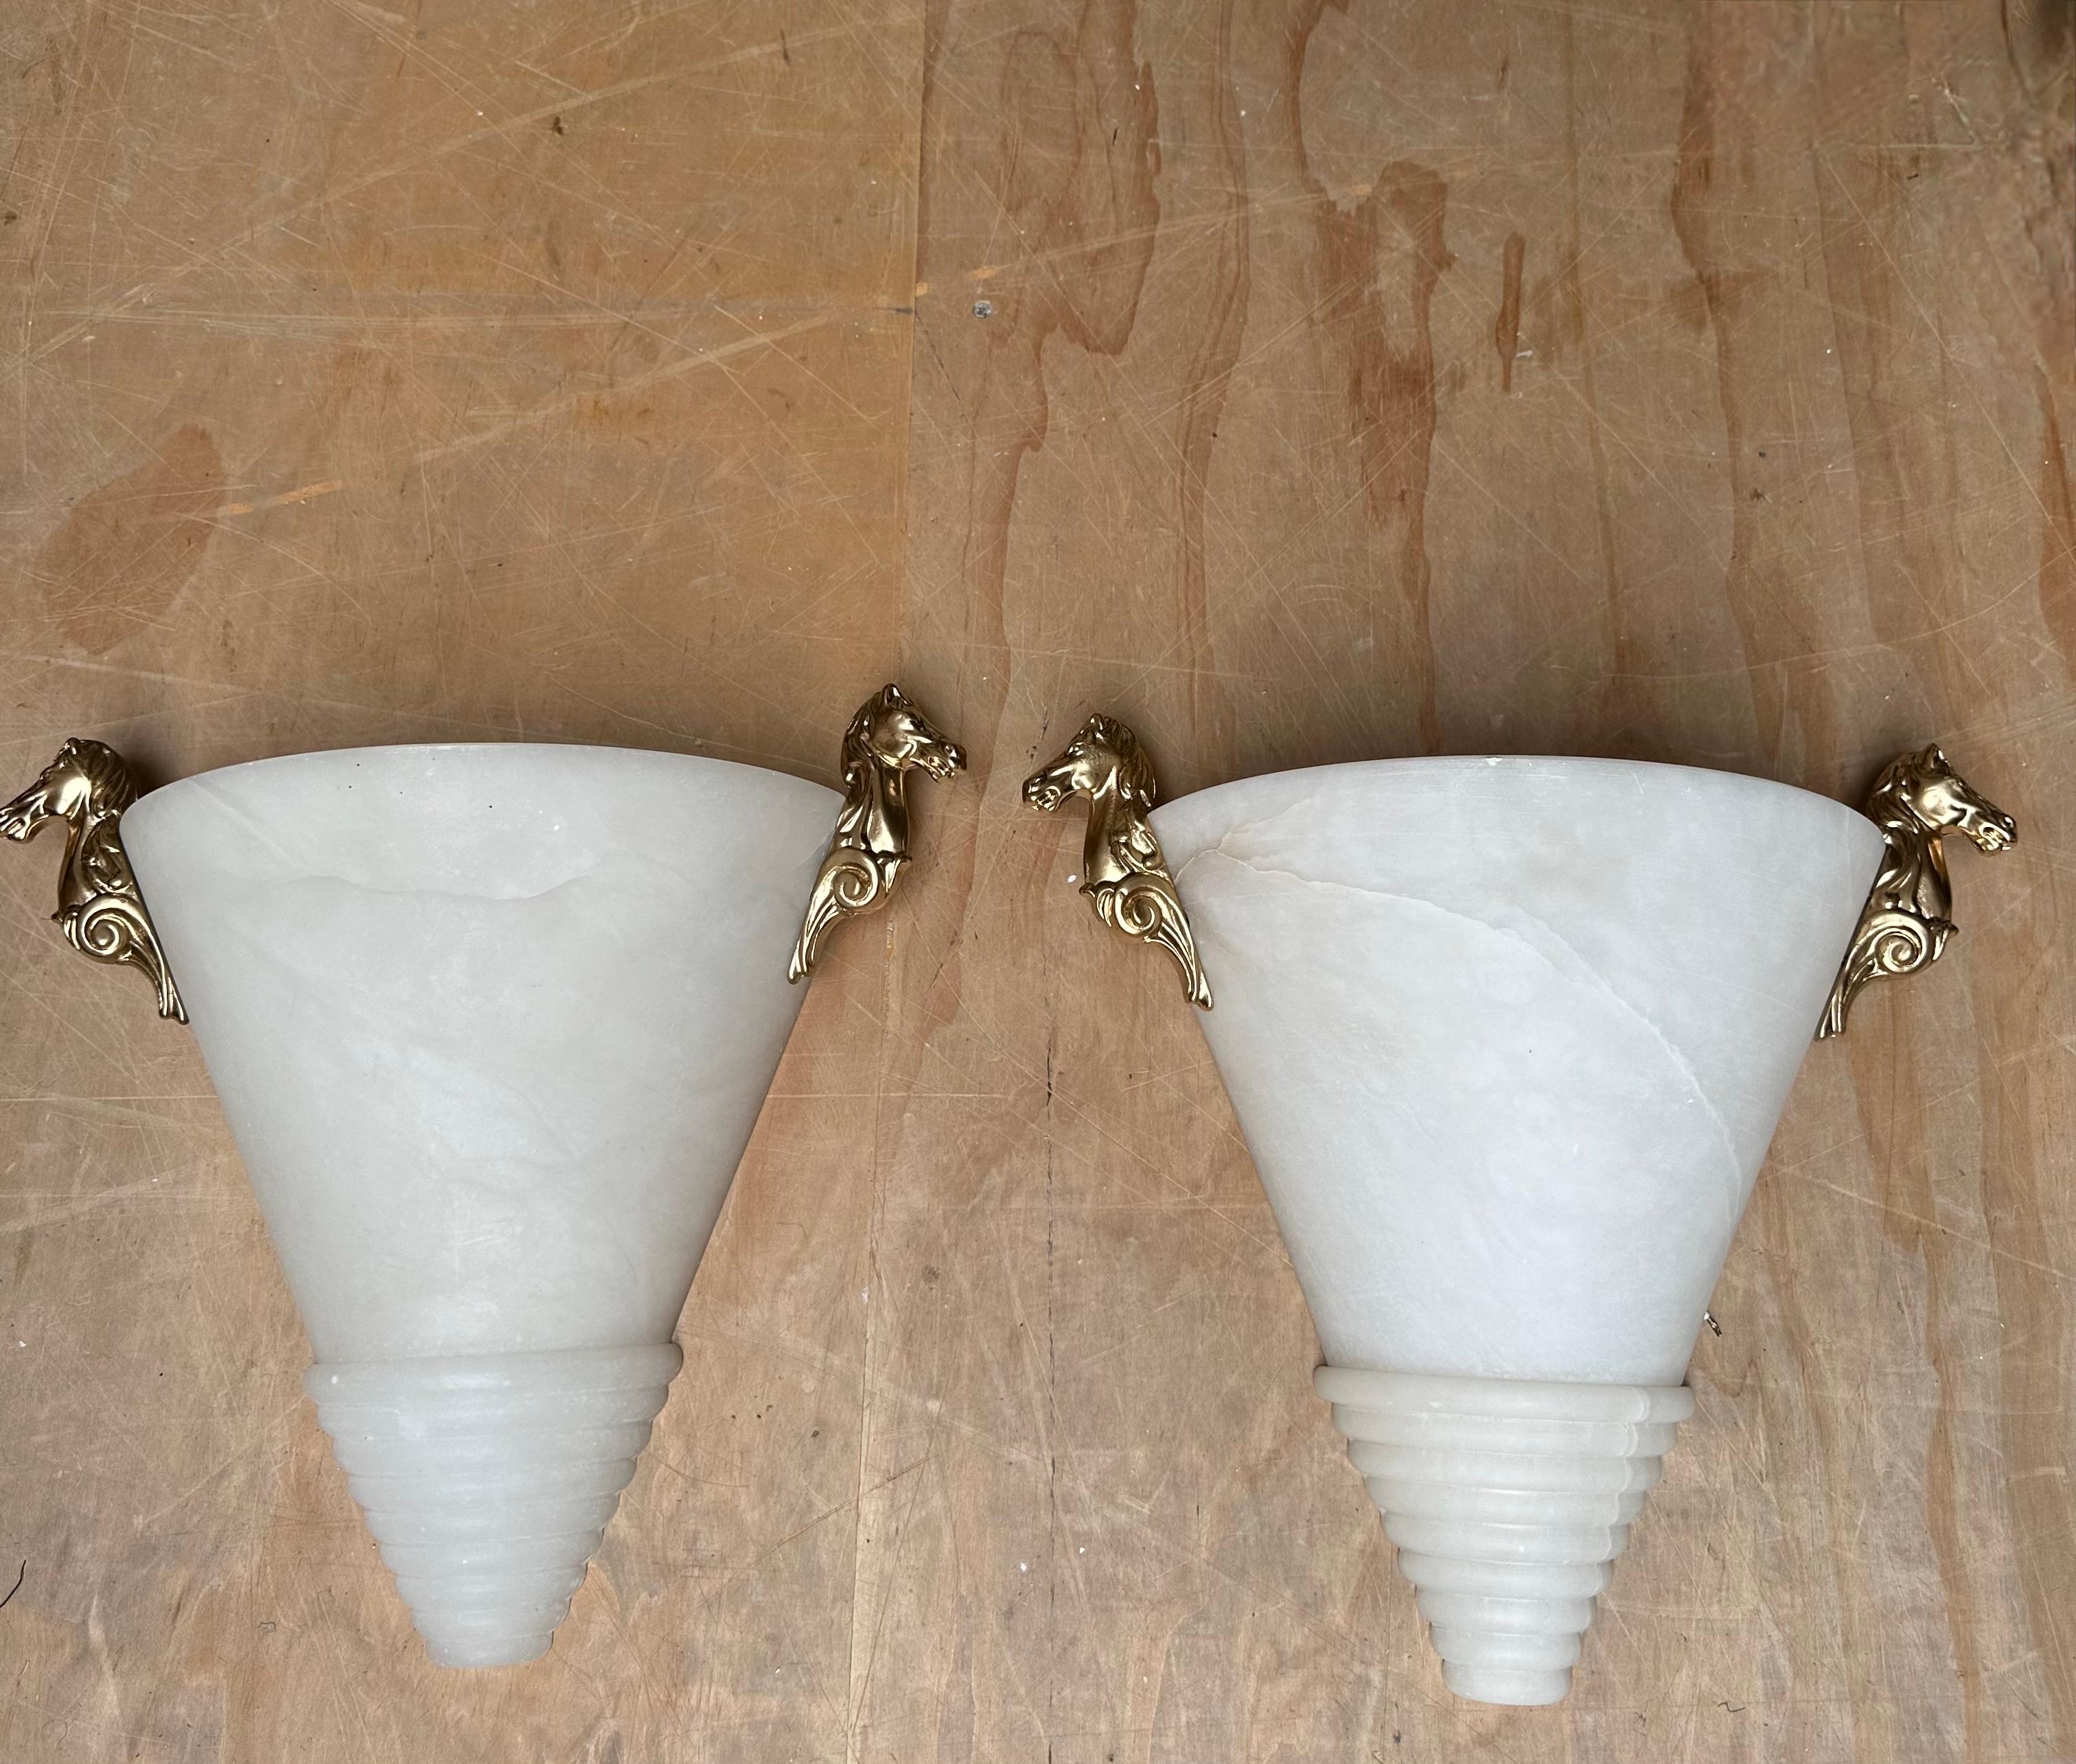 Midcentury Pair Art Deco Design Alabaster Wall Sconces with Horse Sculptures For Sale 12